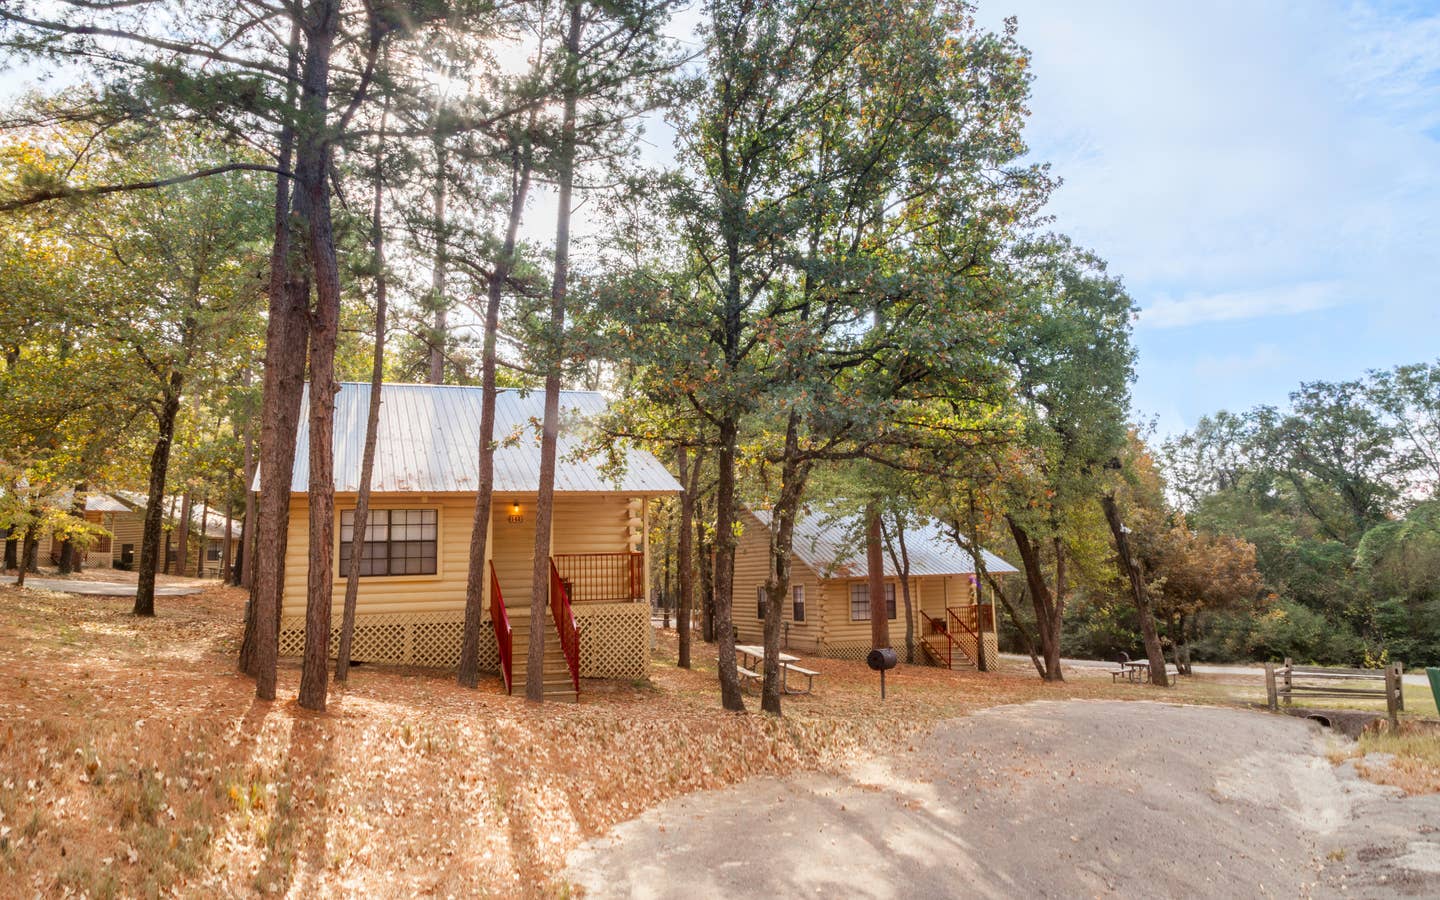 Property building surrounded by trees at Holly Lake Resort in Texas.